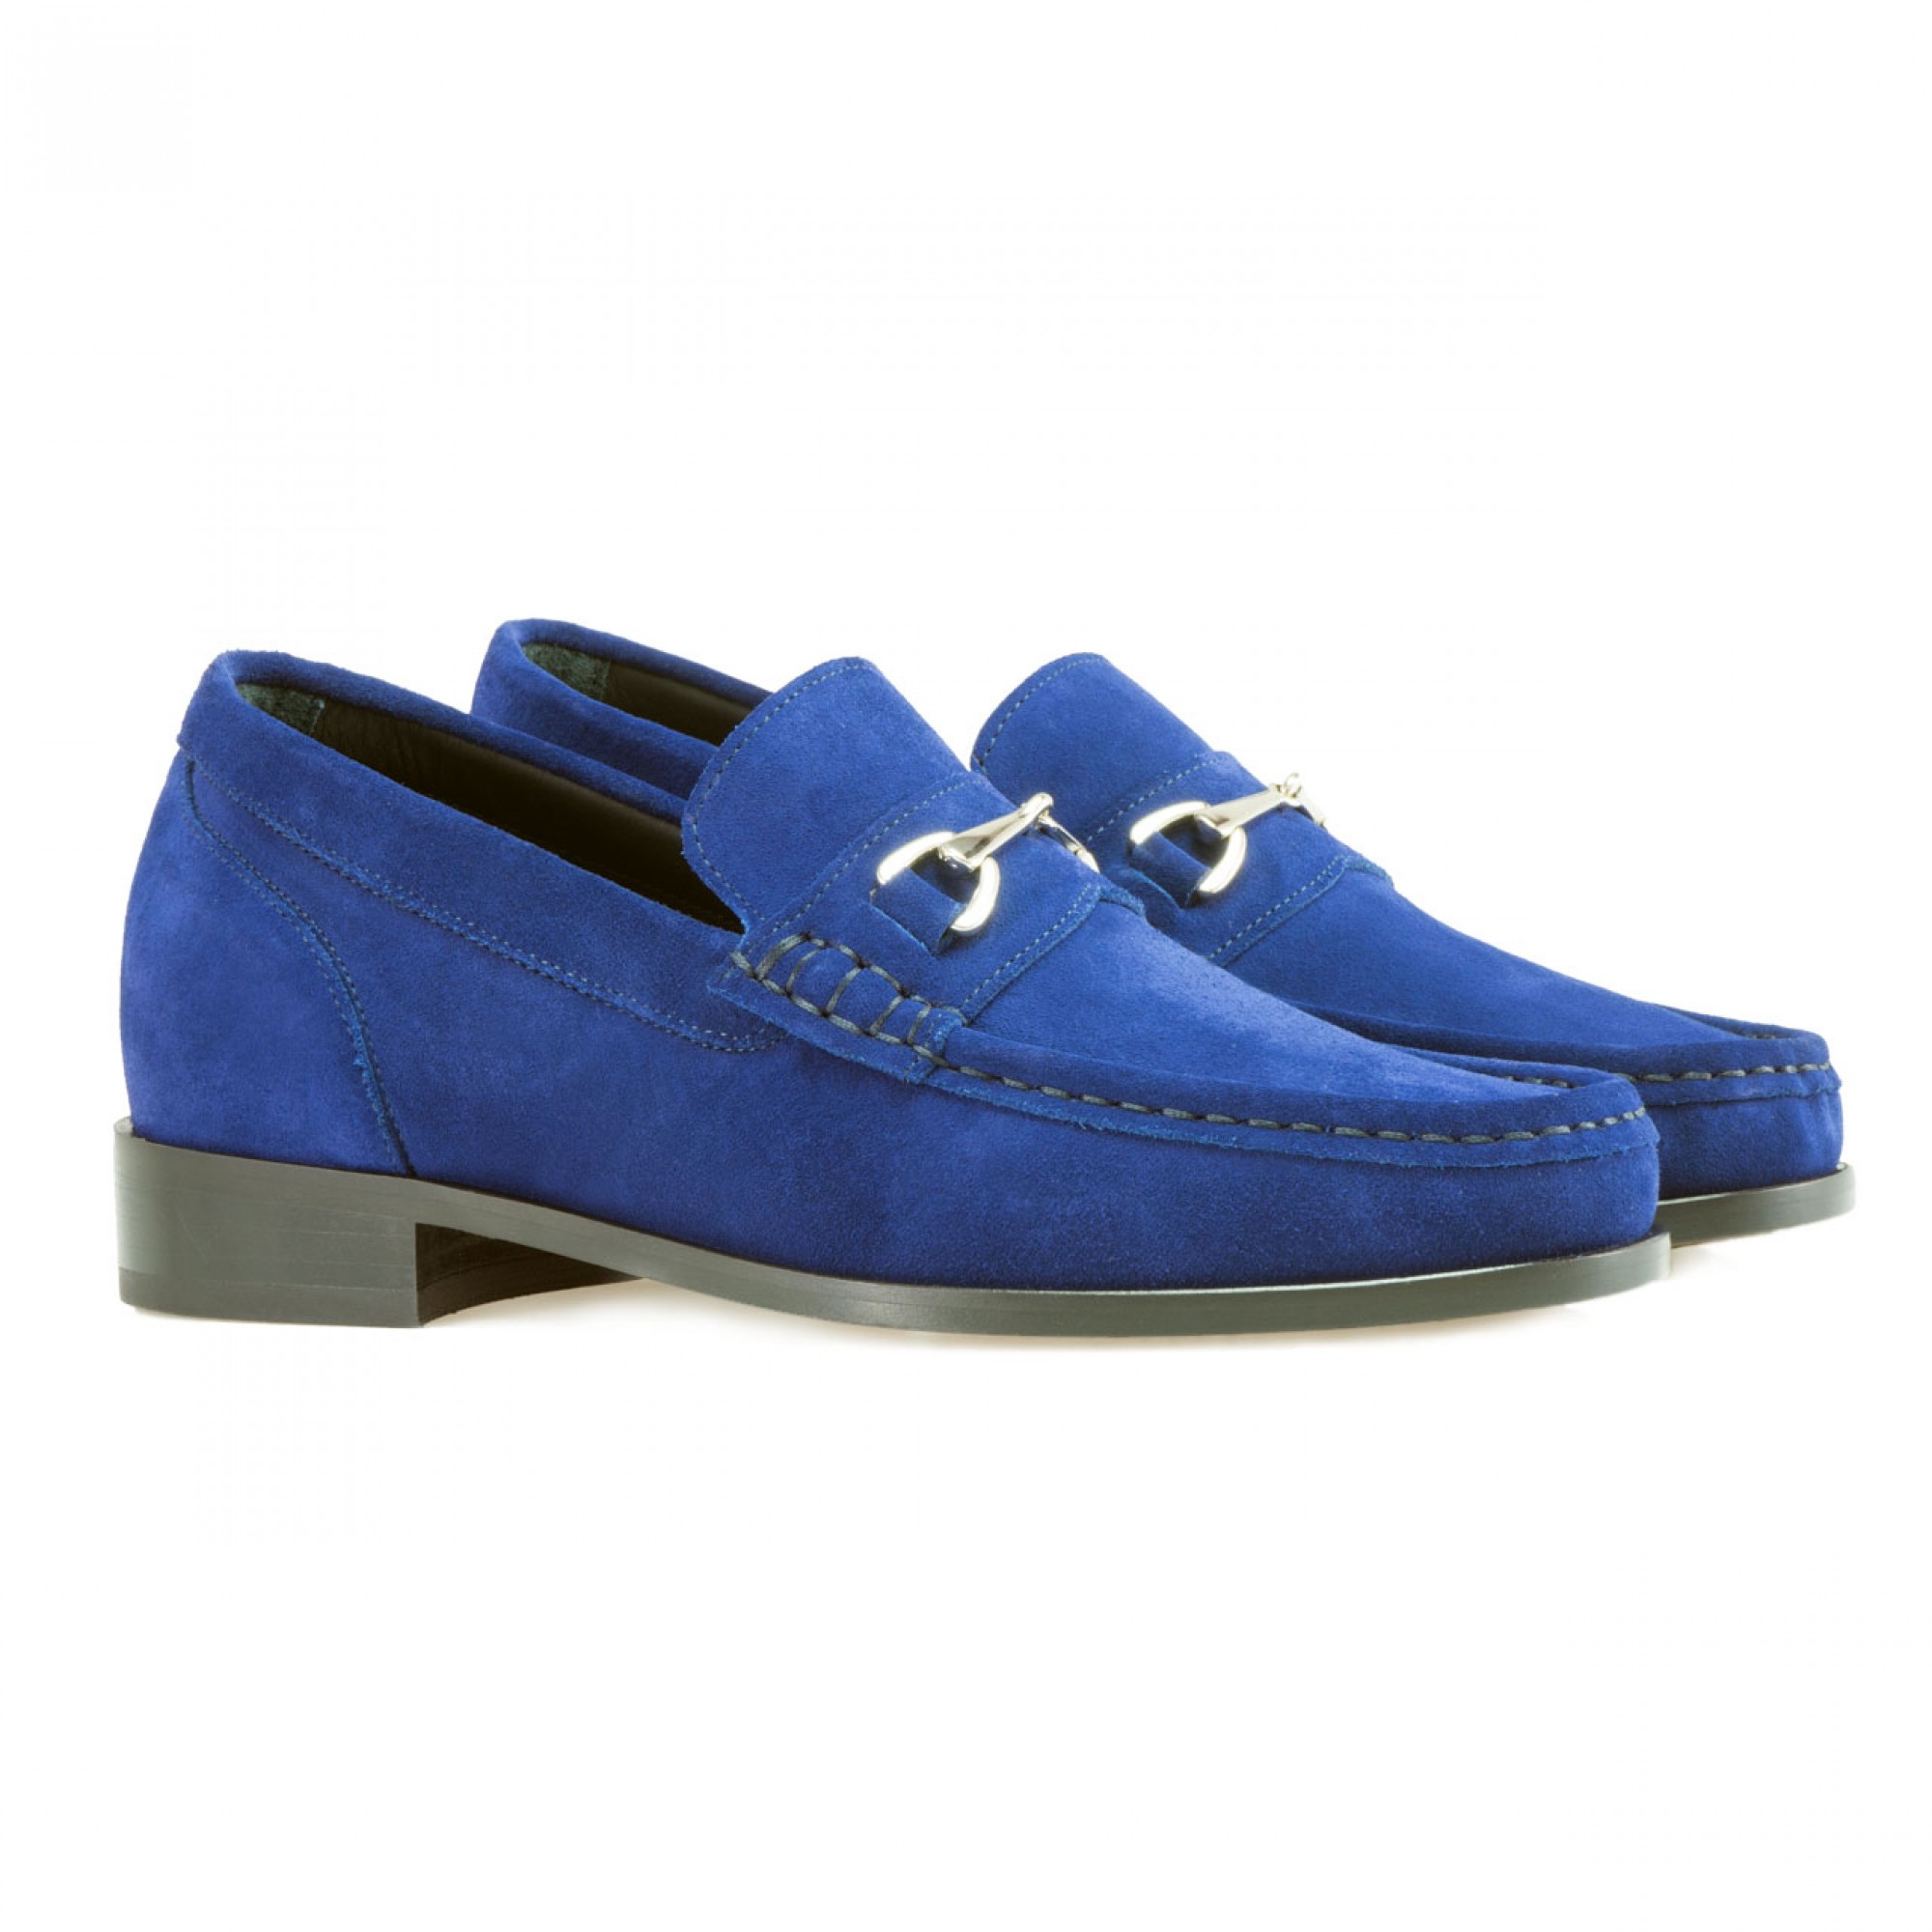 Reims - Elevator Loafers in Suede Leather up to 2.6 inches